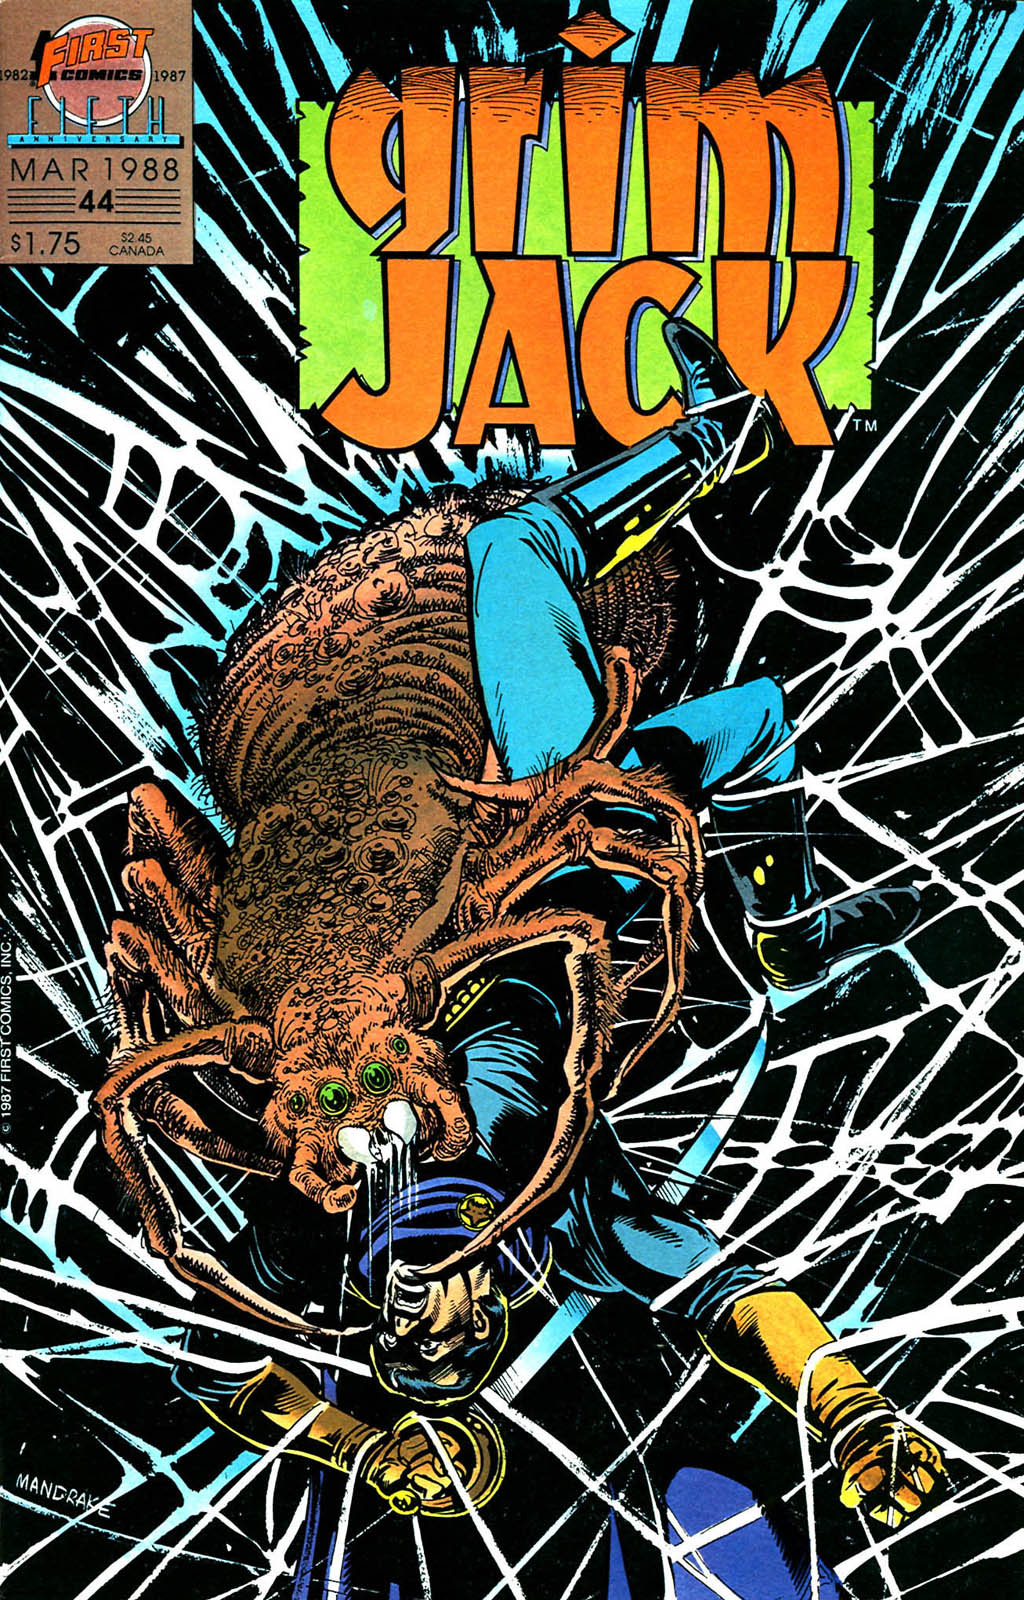 Read online Grimjack comic -  Issue #44 - 1